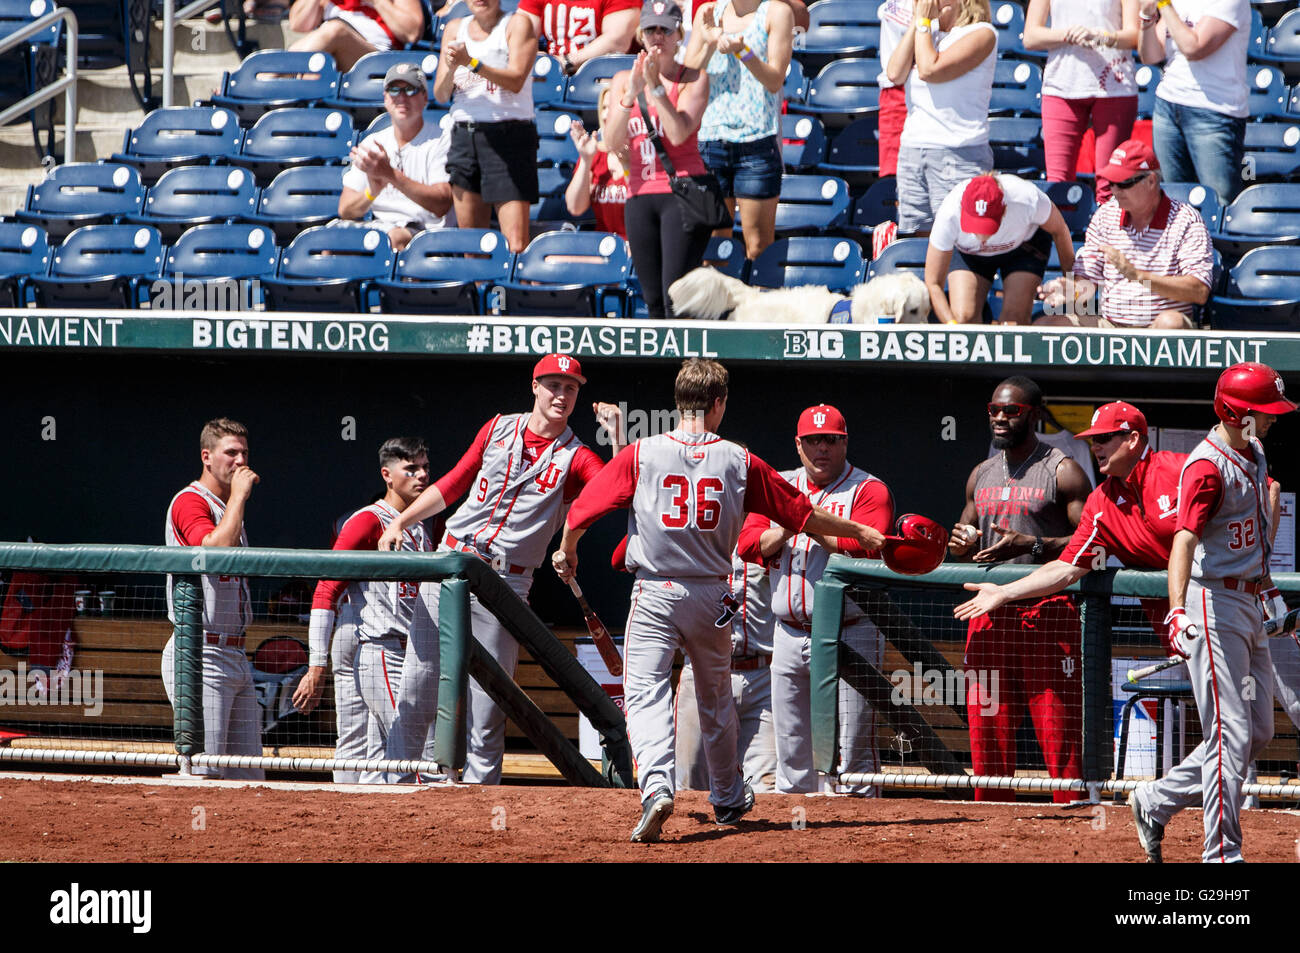 Omaha, NE. 26th May, 2016. U.S. - Indiana infielder Colby Stratten #36 is congratulated by teammates after scoring in action during game 2 of the Big Ten Championship Tournament between Indiana Hoosiers and Nebraska Cornhuskers at TD Ameritrade Park in Omaha, NE.Indiana won 6-2.Michael Spomer/Cal Sport Media. © csm/Alamy Live News Stock Photo